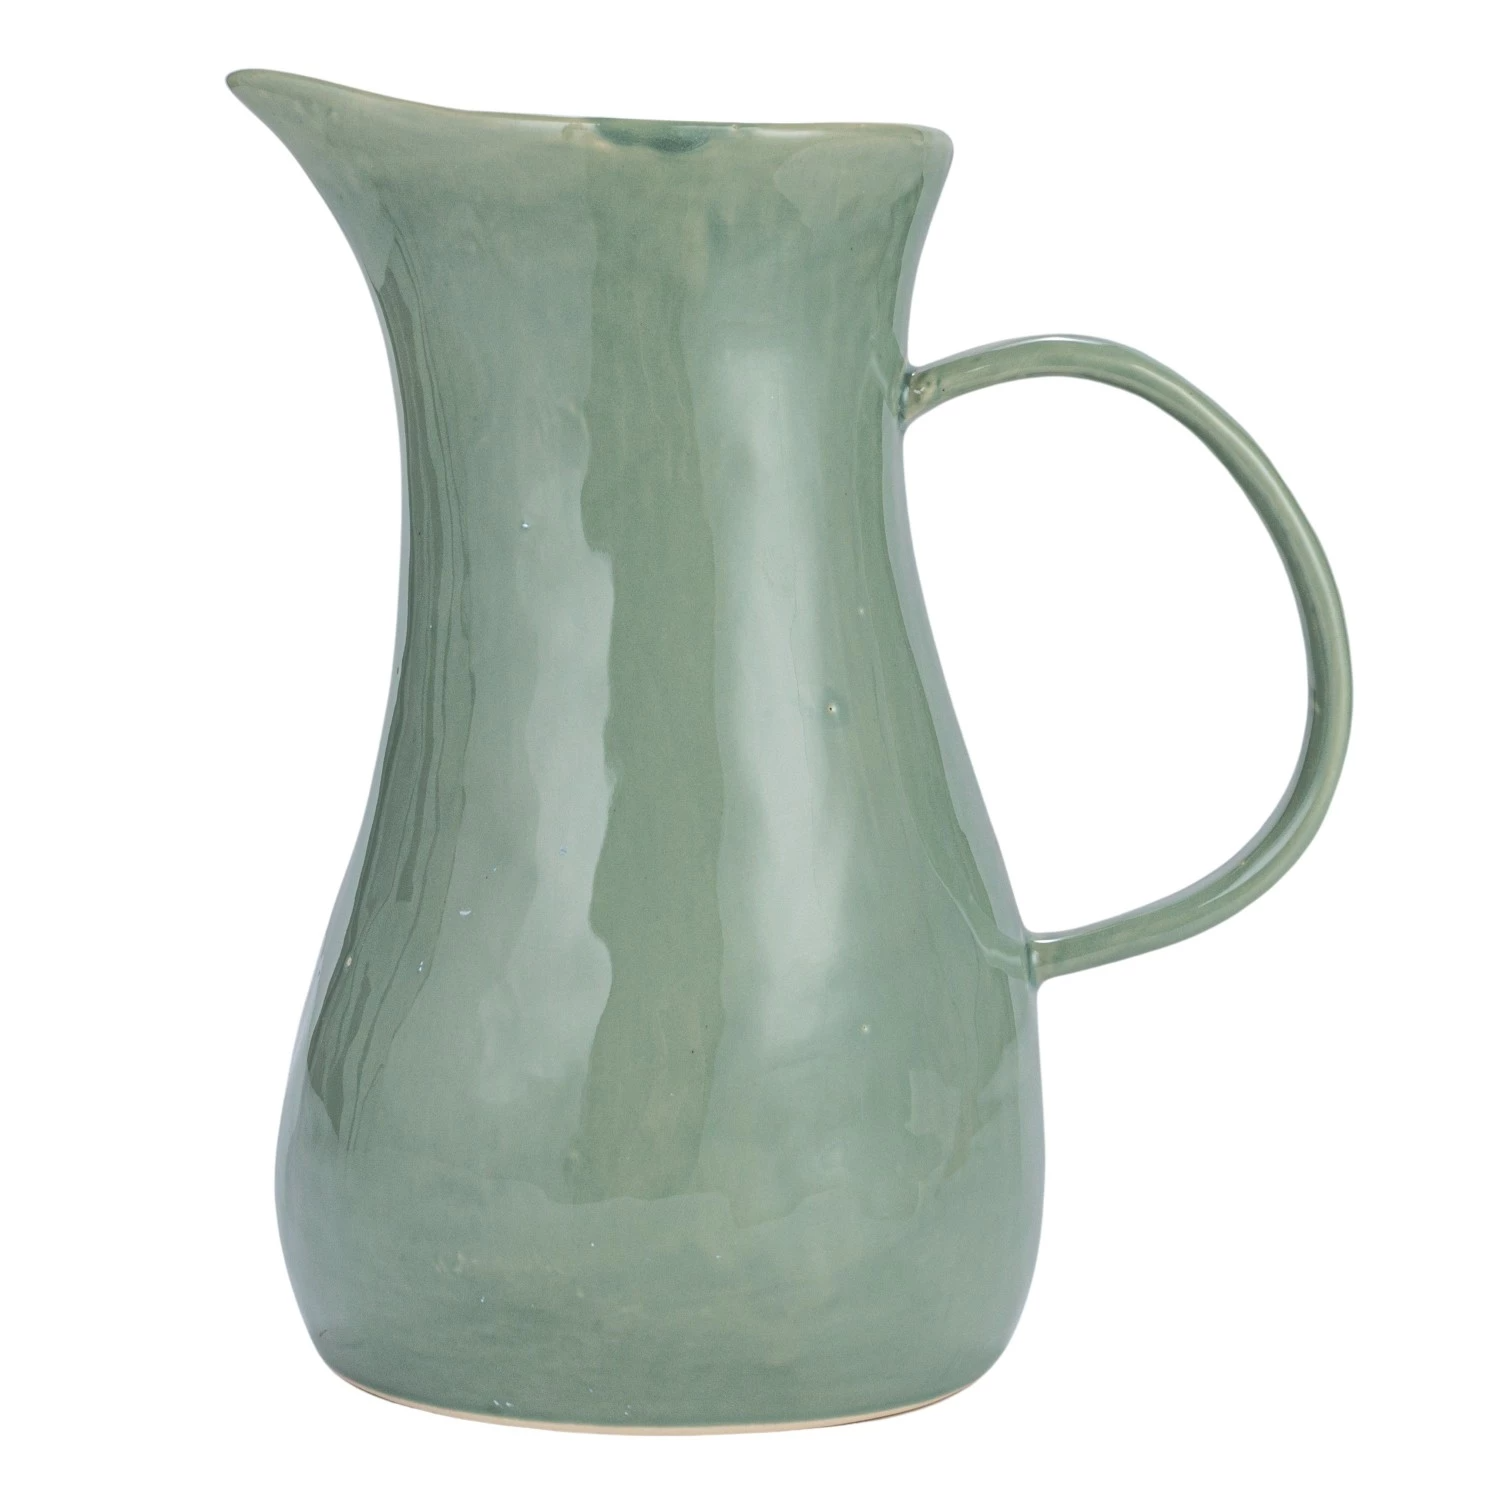 Sage Green Hand-Painted Stoneware Pitcher with Wax Relief Flowers - 2 Quart - Mellow Monkey